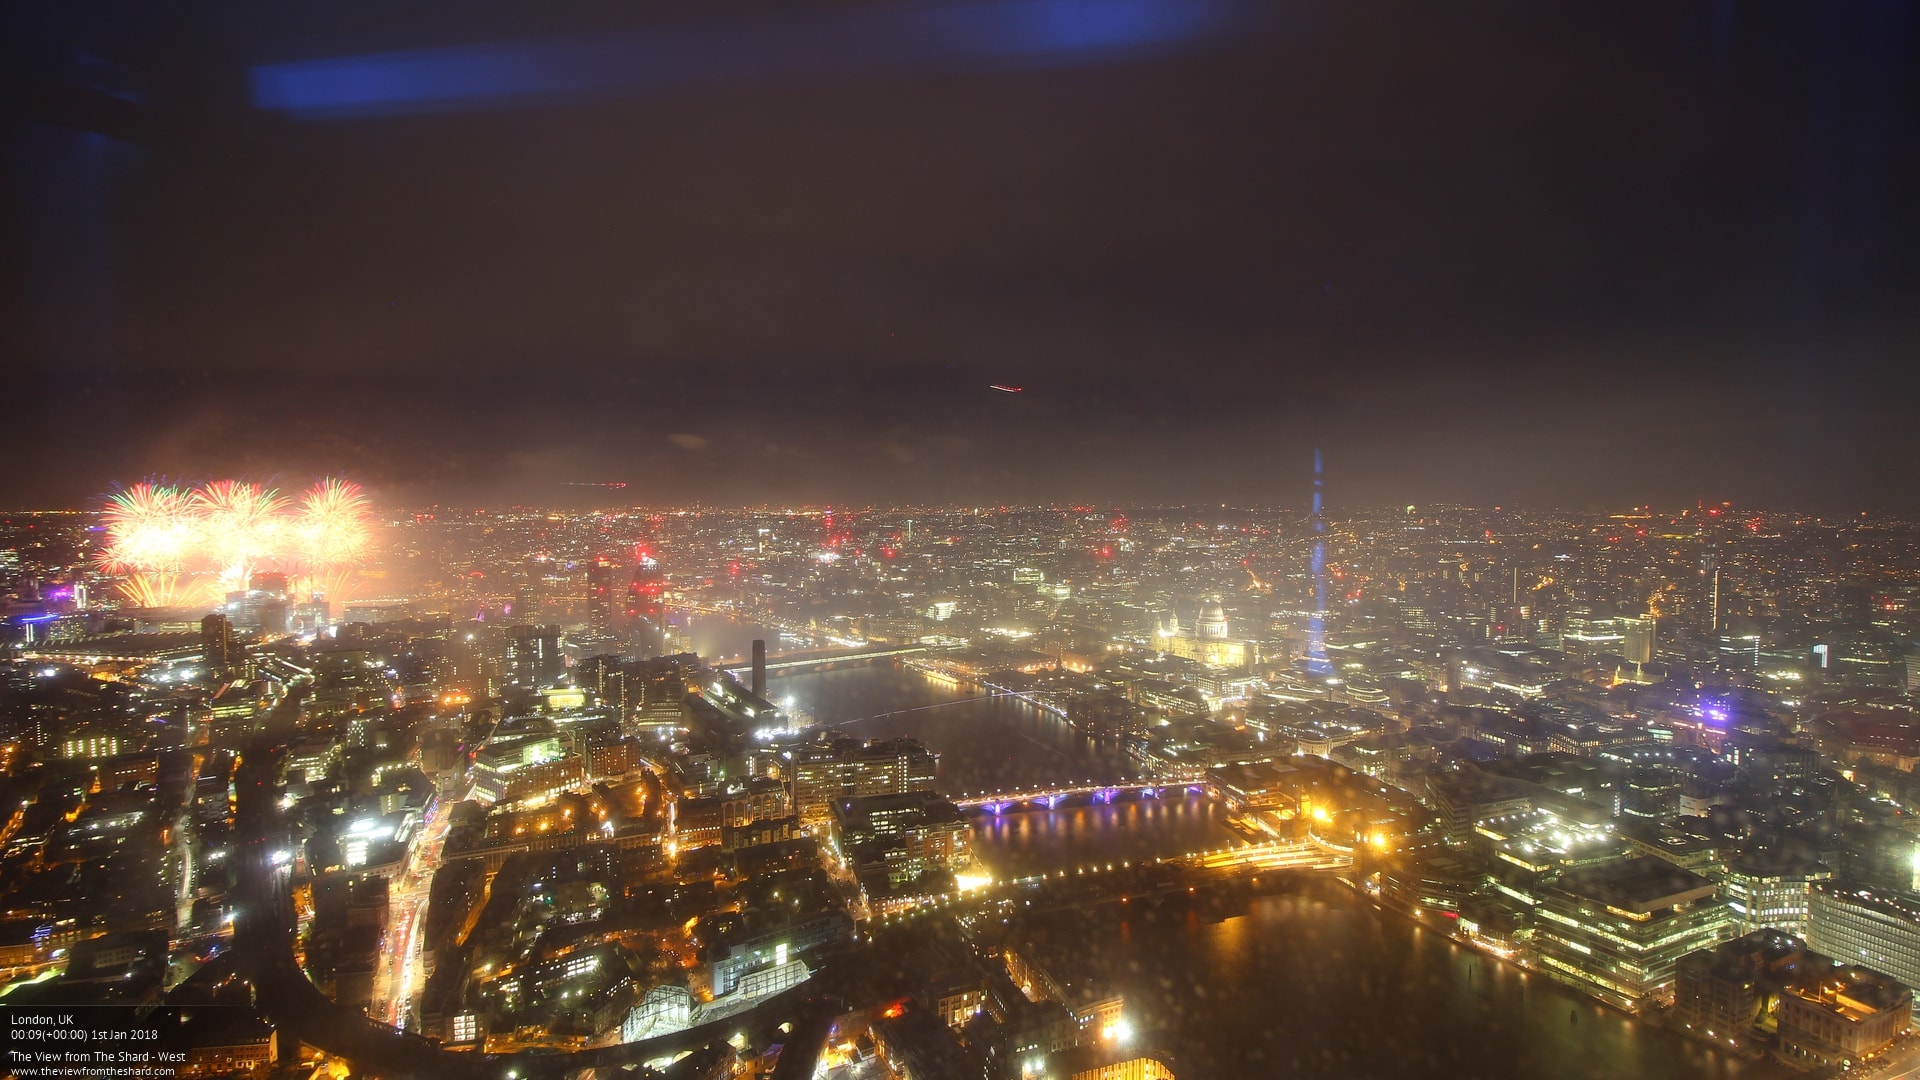 Londo New Year celebration seen from top of The Shard webcam